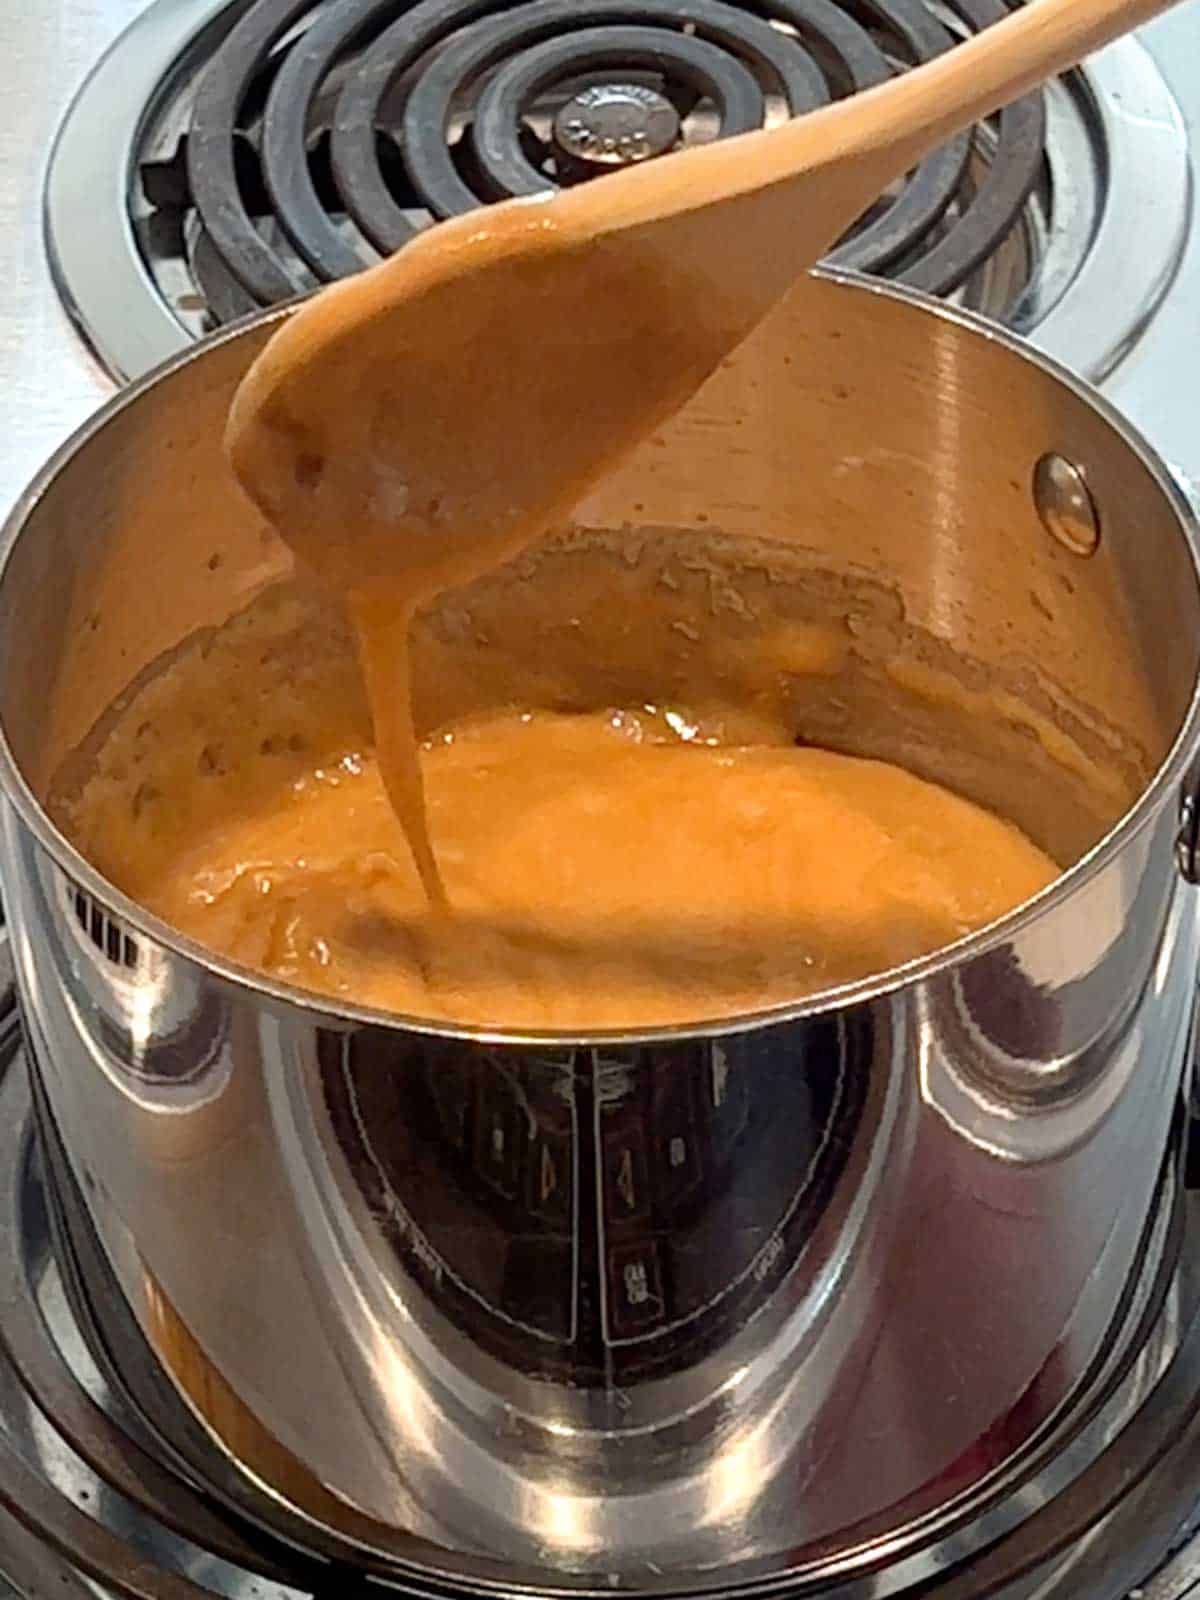 Caramel in saucepan ready for pouring.